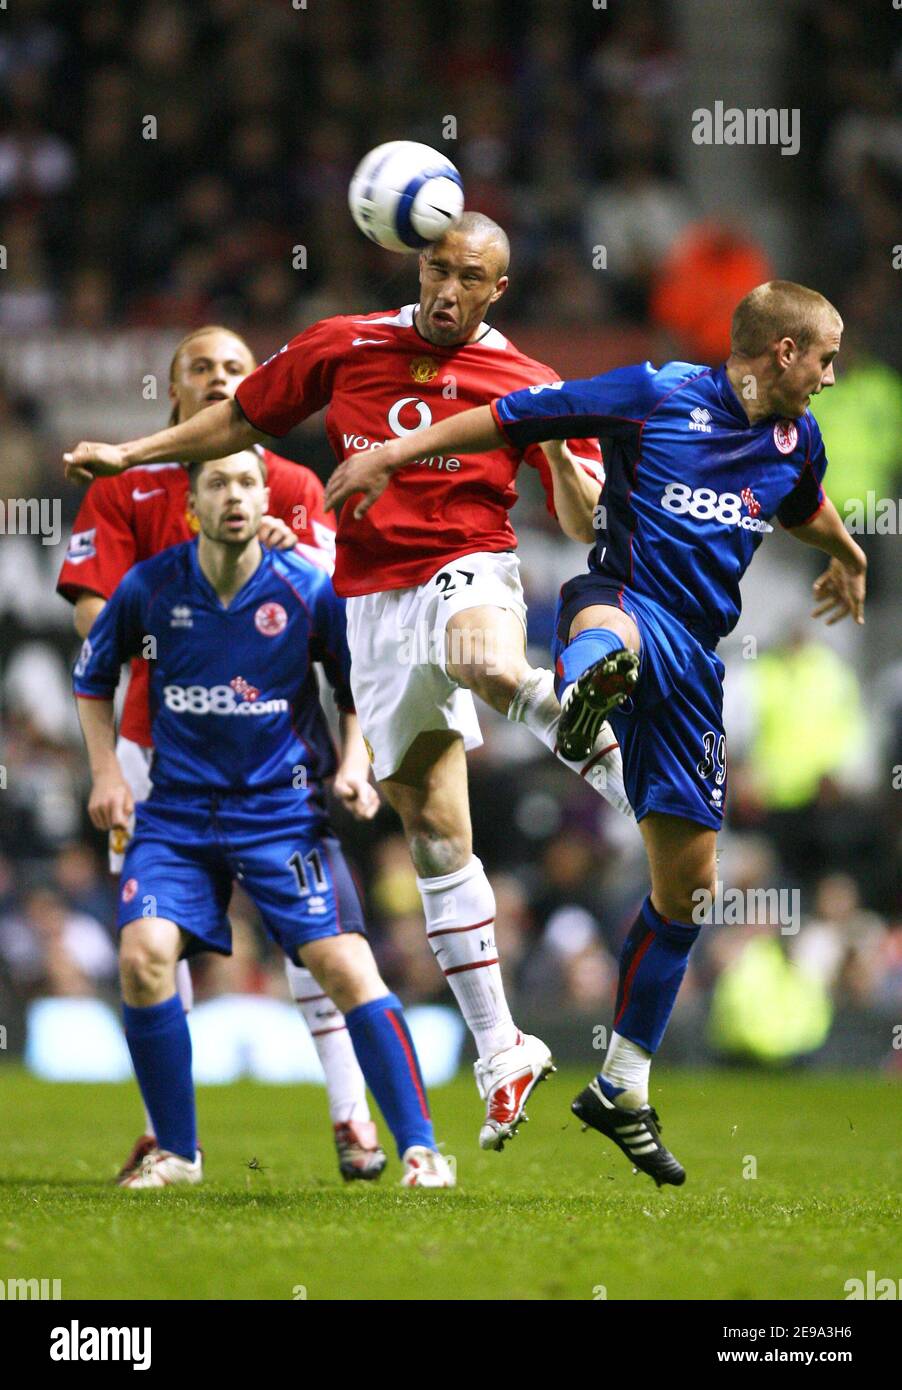 Manchester United's Mikael Silvestre and Middlesbrough's Lee Cattermole during the FA Barclays Premiership, Manchester United vs Middlesbrough in Manchester, UK on May 1, 2006. The game ended in a draw 0-0. Photo by Christian Liewig/ABACAPRESS.COM Stock Photo